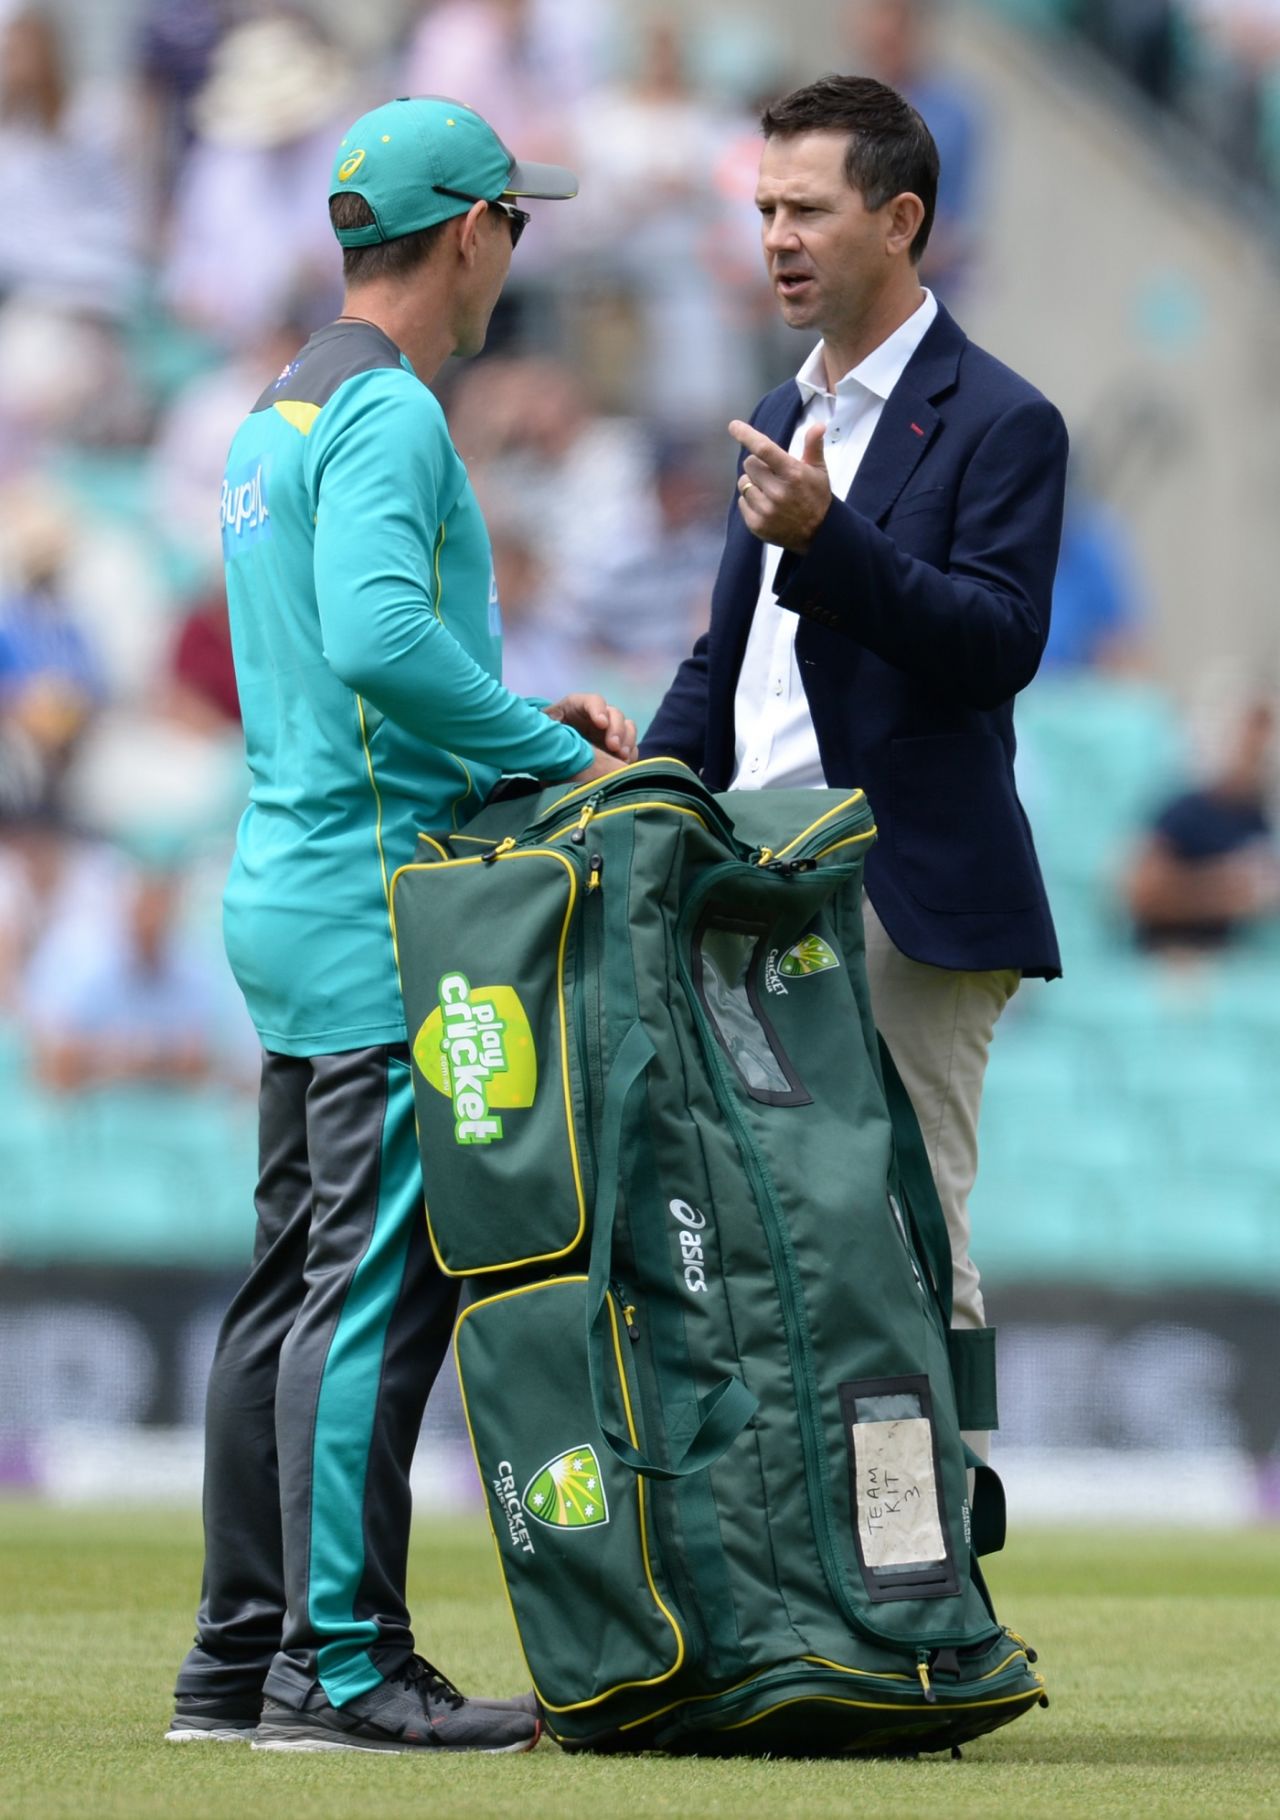 Ricky Ponting has a chat with Justin Langer, England v Australia, 1st ODI, The Oval, June 13, 2018